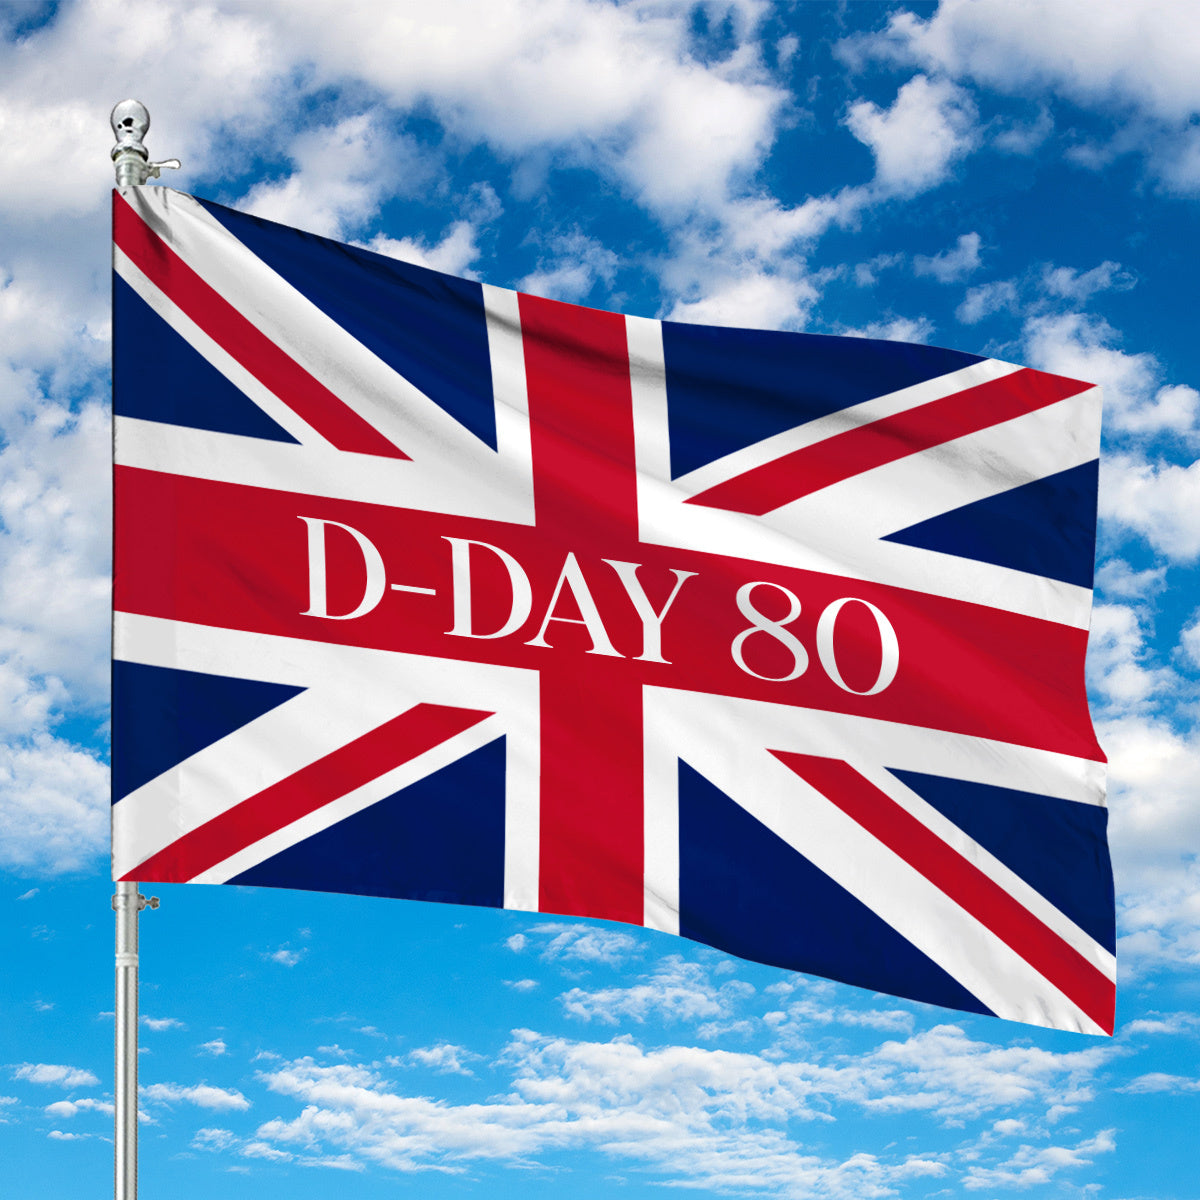 D-Day 80th Anniversary Union Jack House Flag